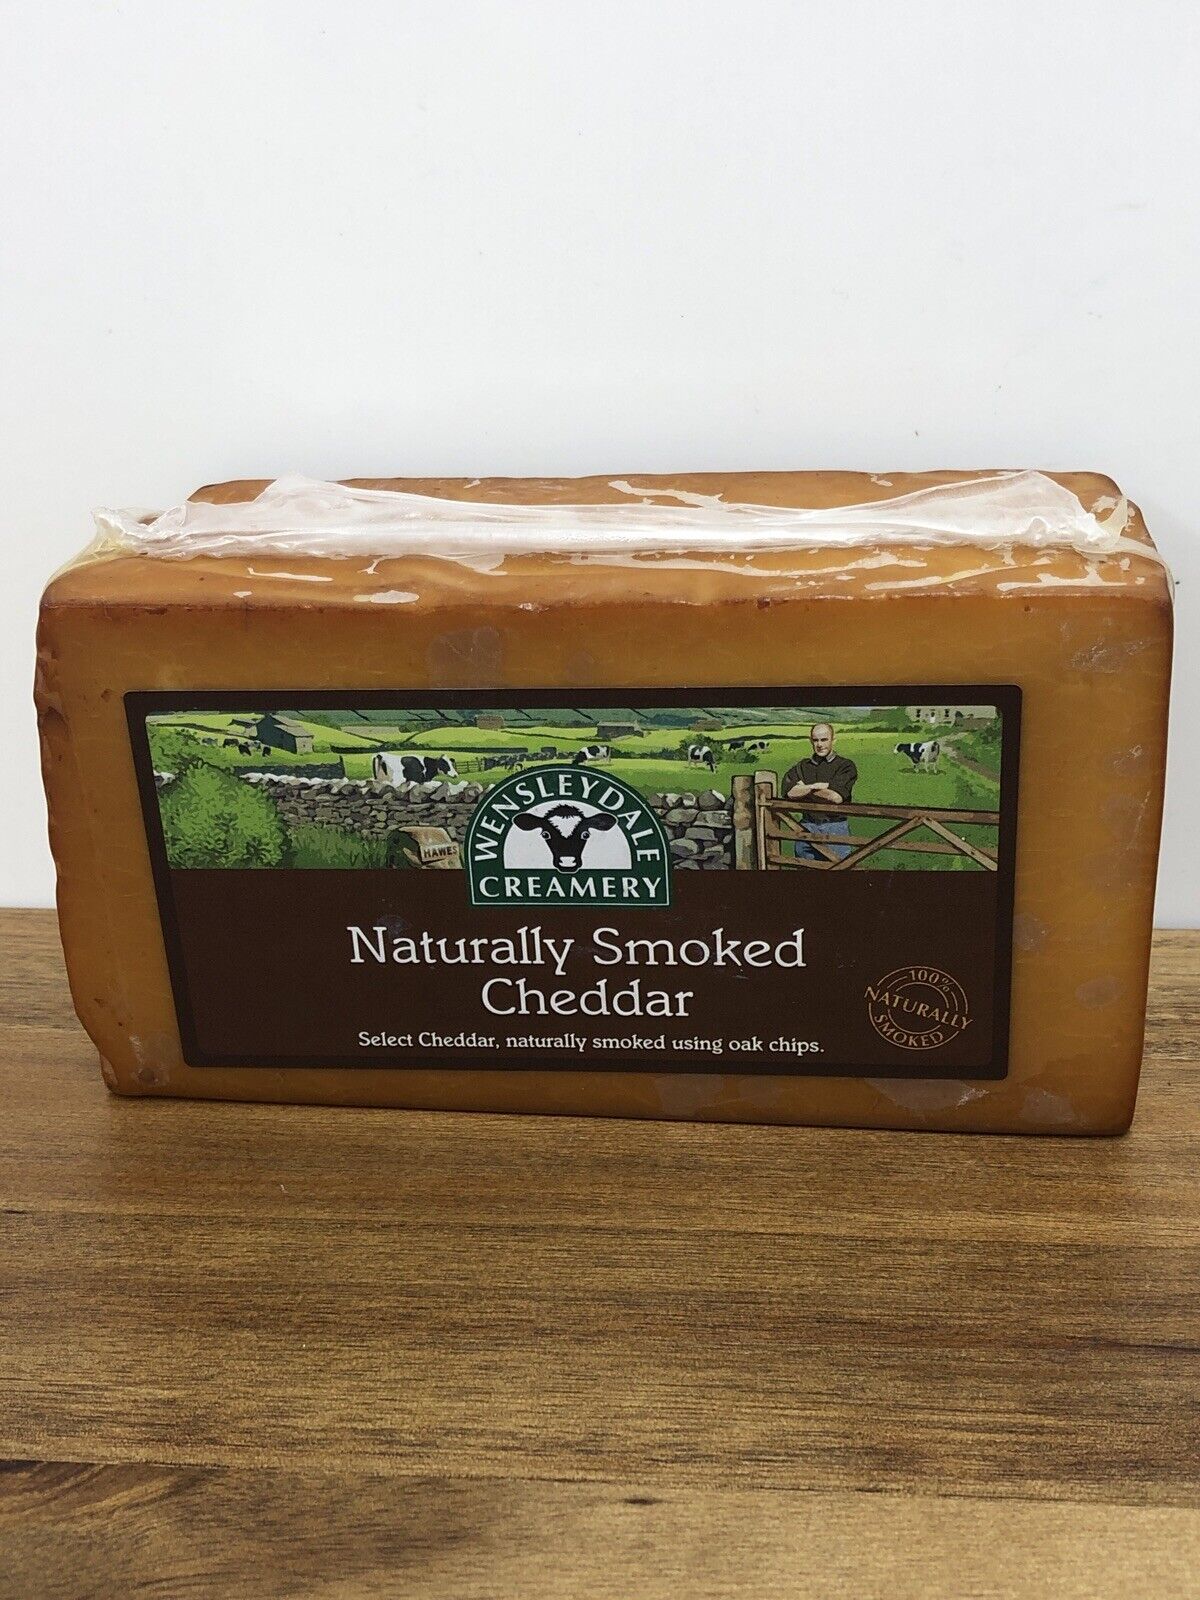 Naturally Smoked Cheddar Cheese 1.2kg From The Wensleydale Cream